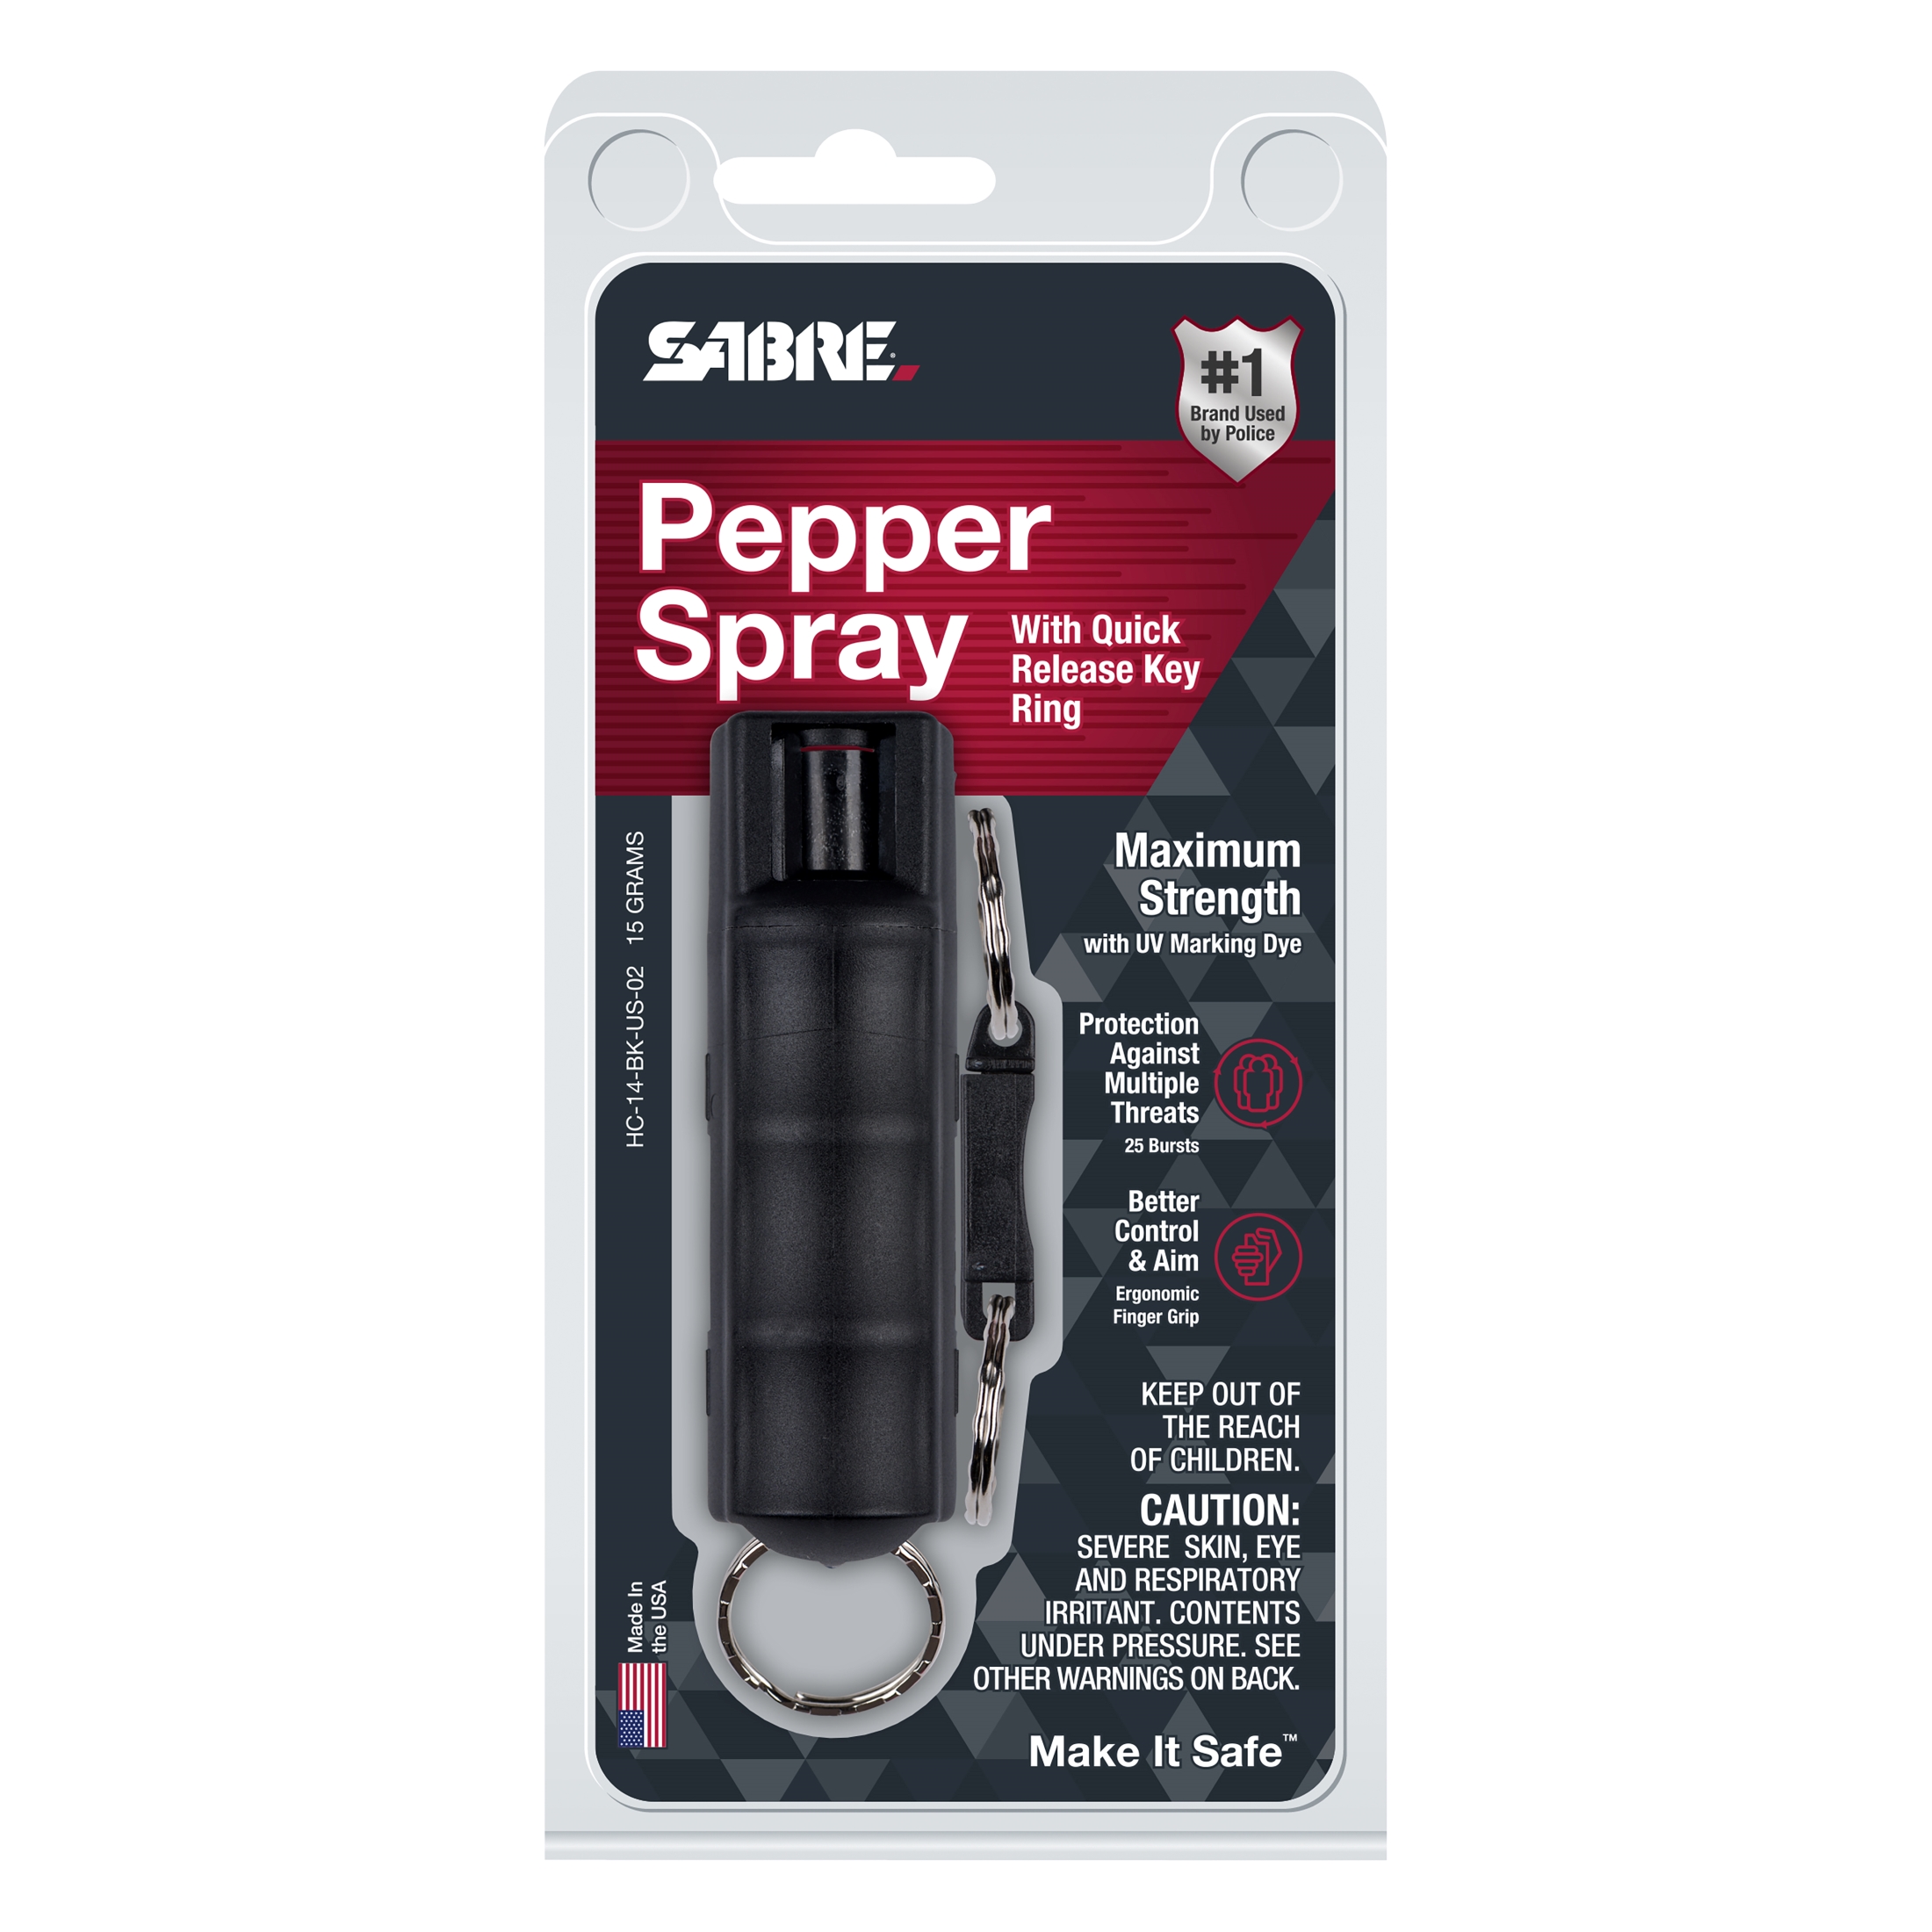 SABRE Pepper Spray with Quick Release Keychain, Black Color, 1 Ct, 0.21 lb, 1 in x 1 in x 3.6 in - image 3 of 8